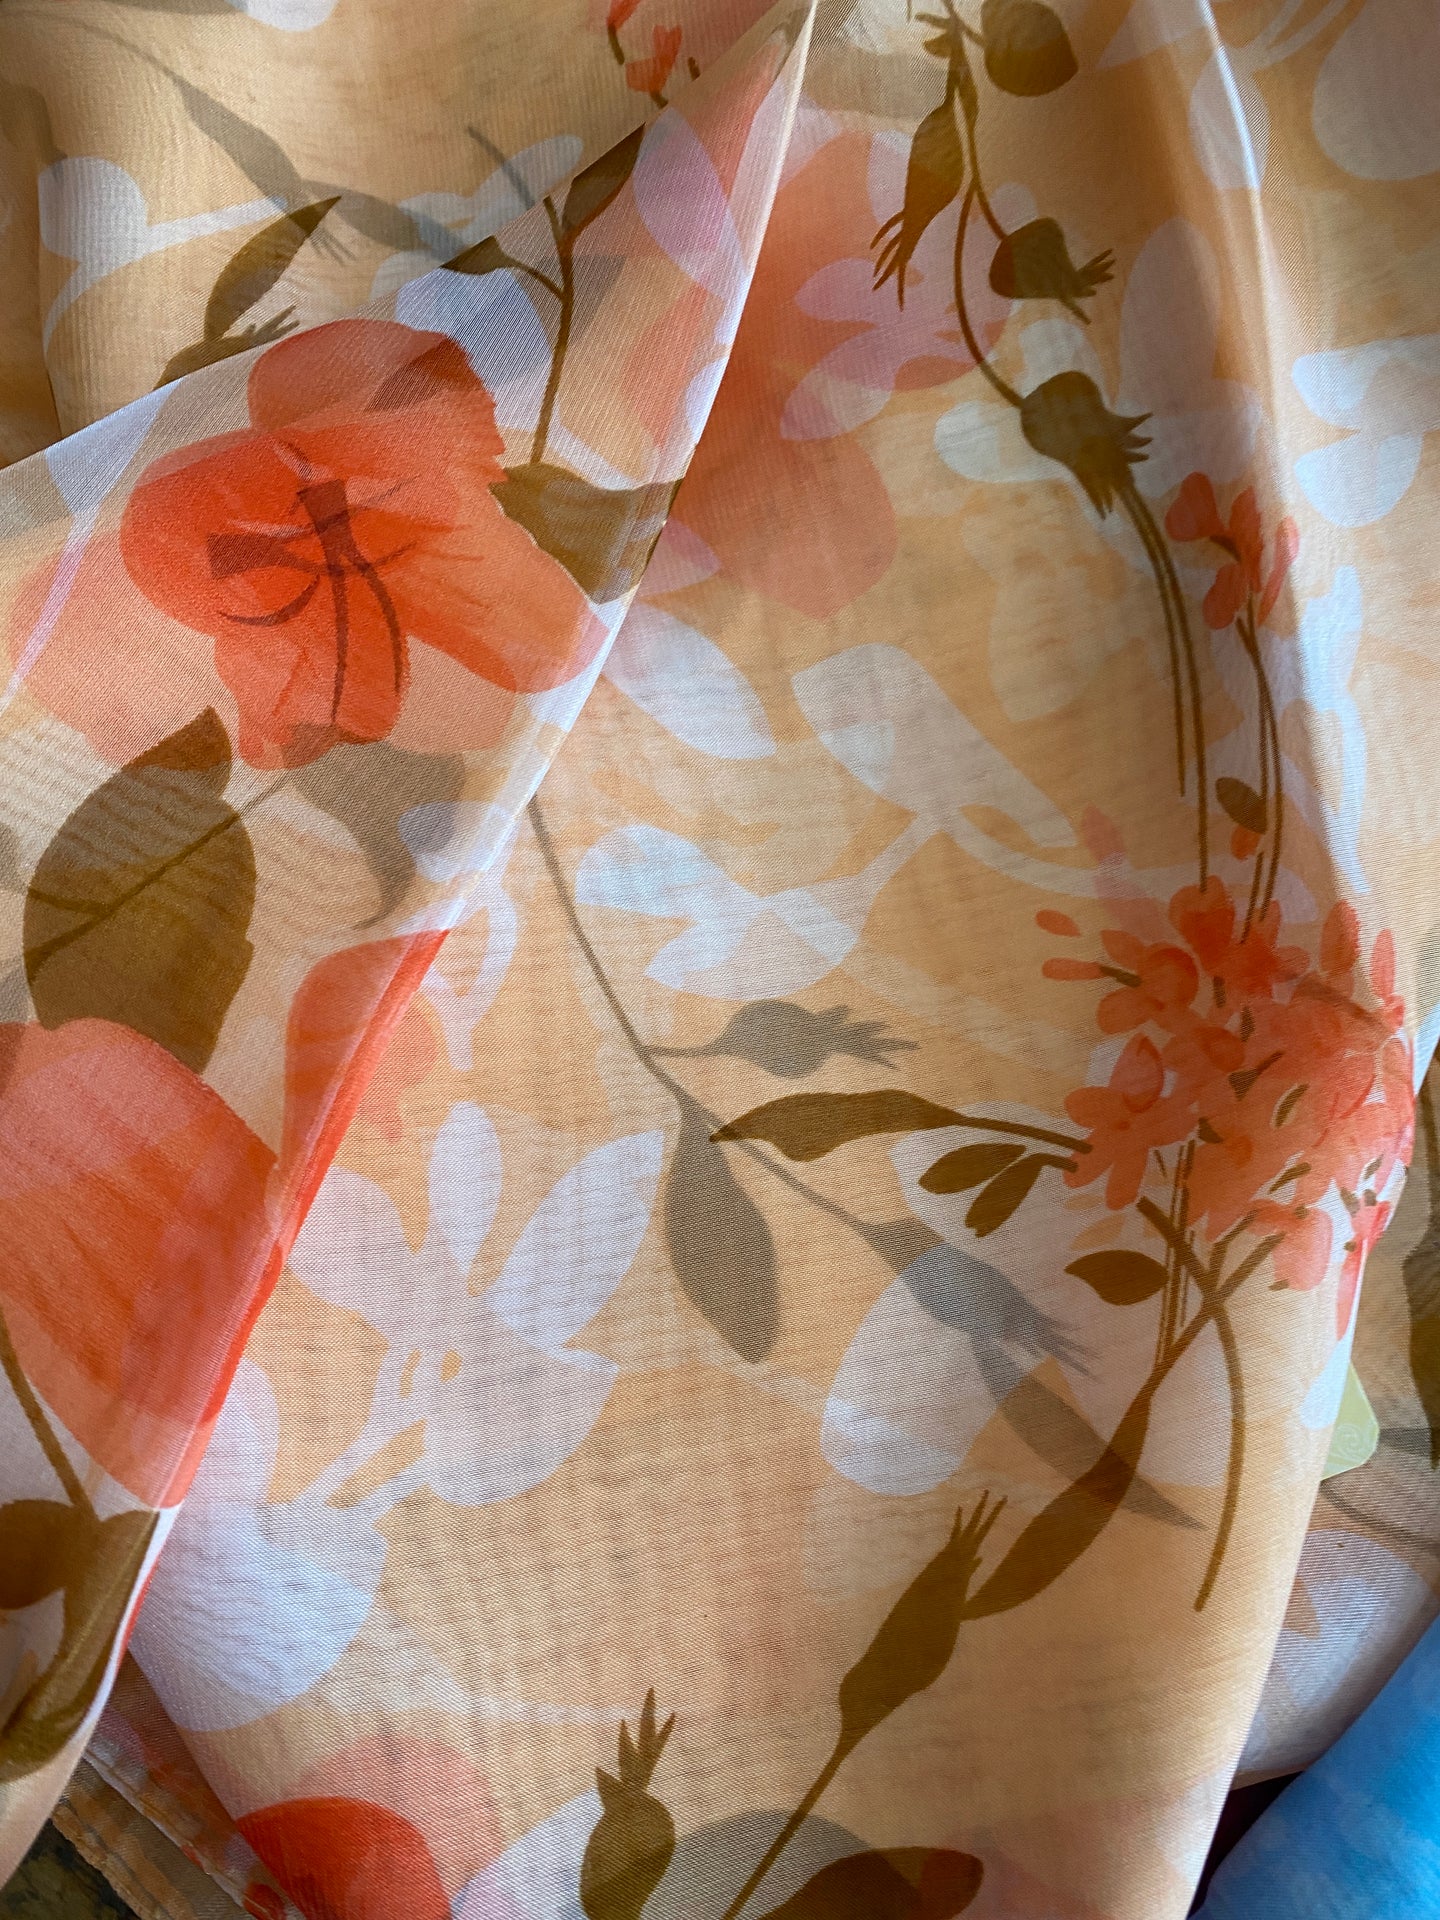 A scarf is shown. It has a orange flower pattern on it and has a white silhouettes of flowers and leaves. The background of the scarf is a peach colour. The fabric is light and slightly see through. 